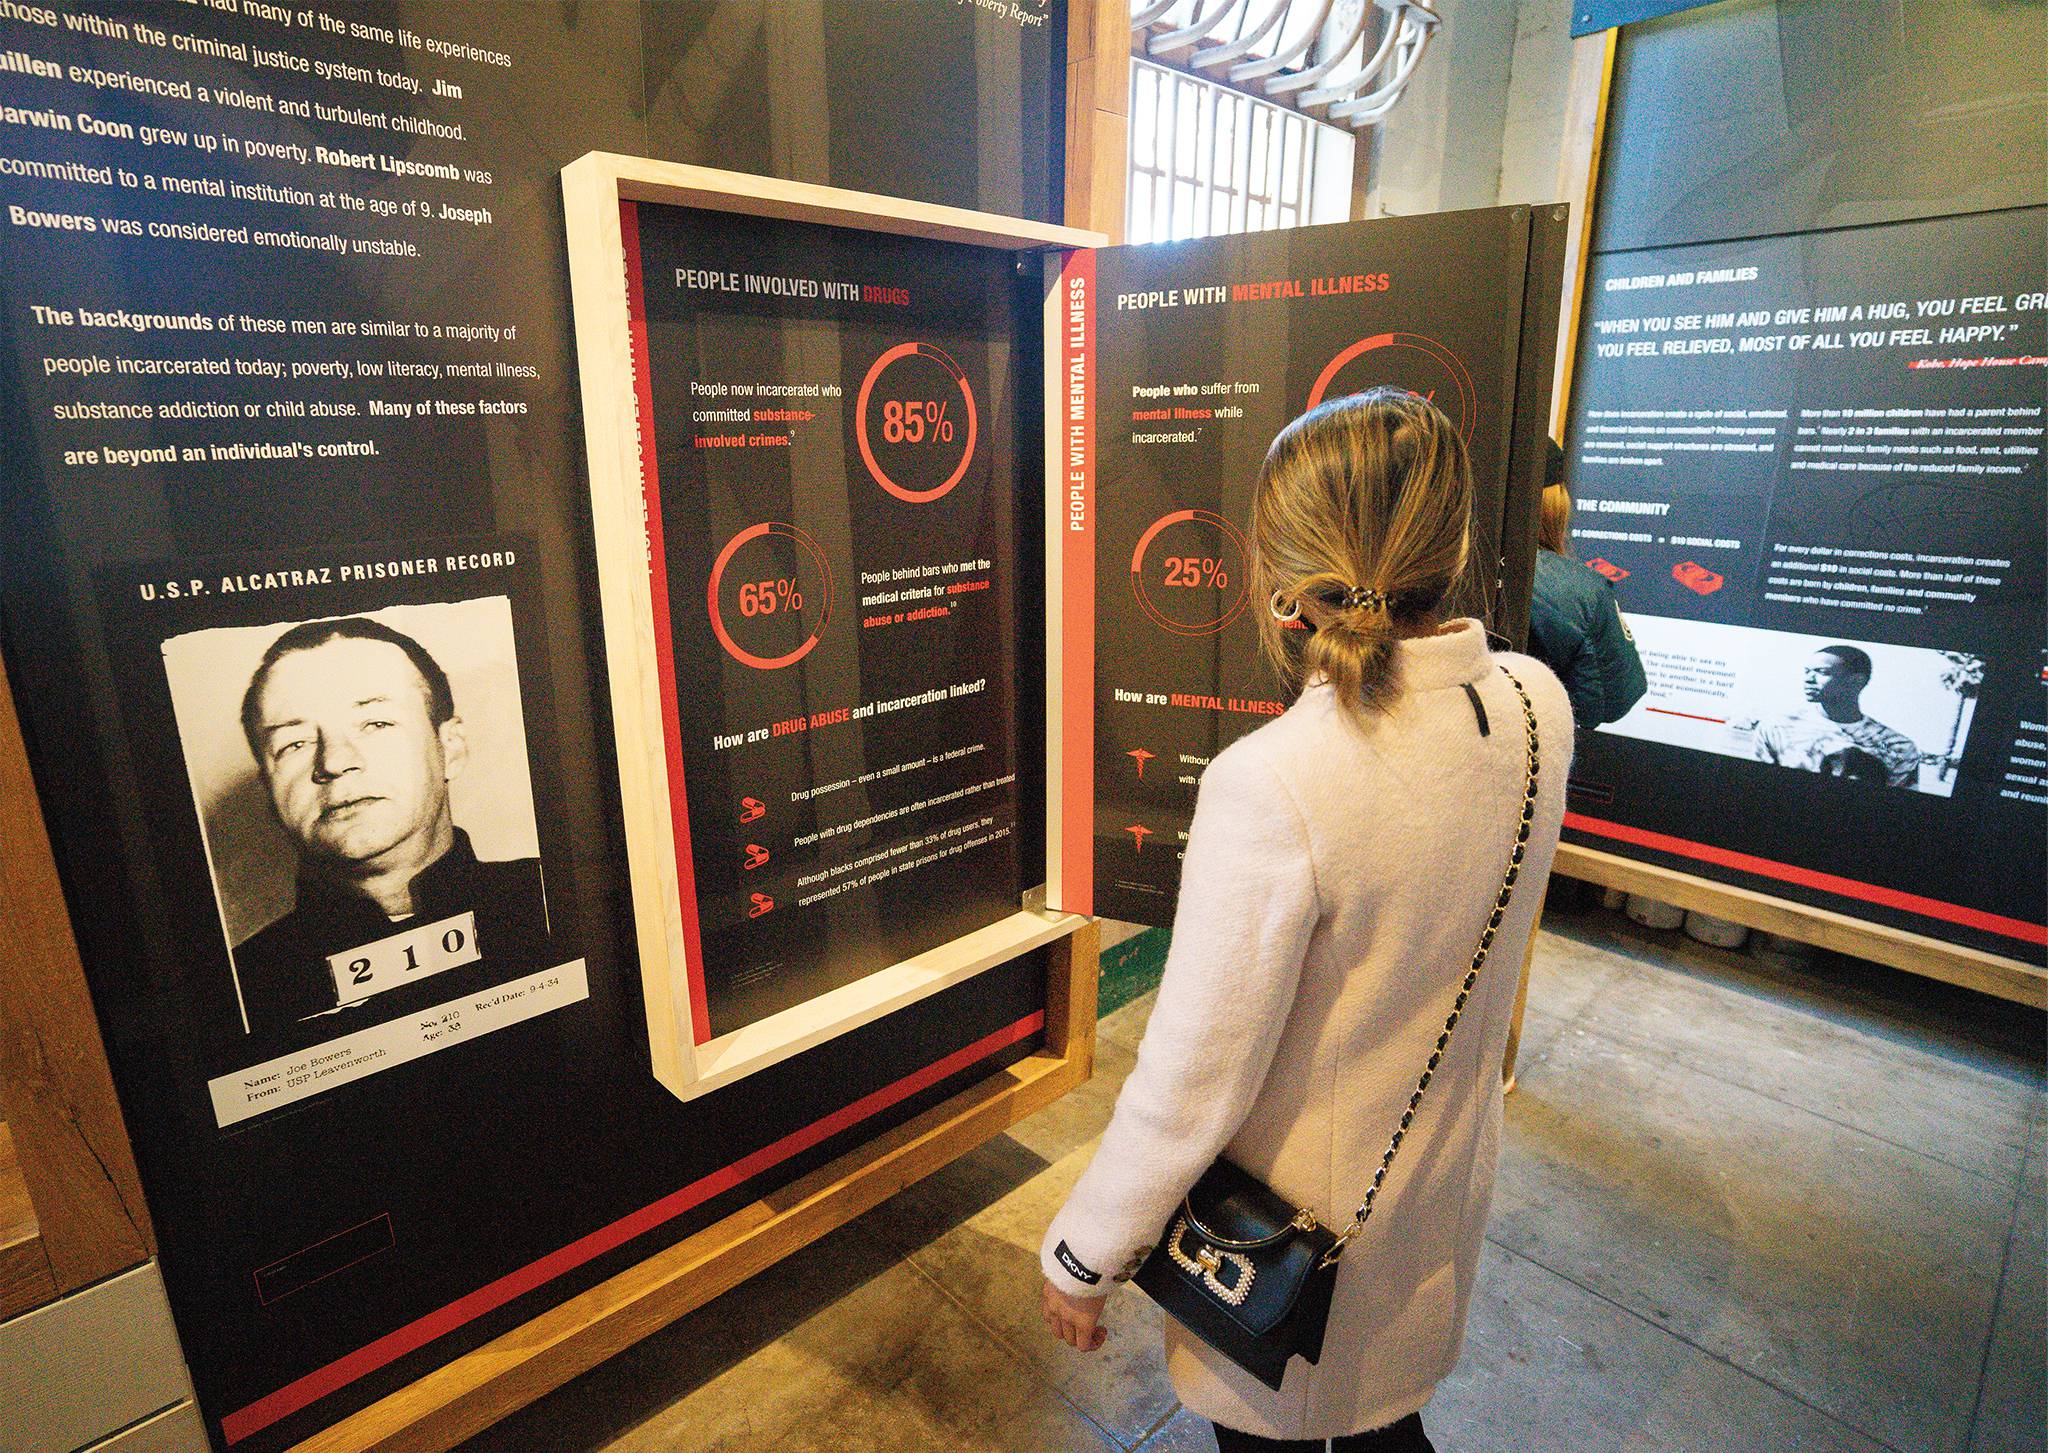 A visitor views charts in The Big Lockup exhibit about Alcatraz and incarceration